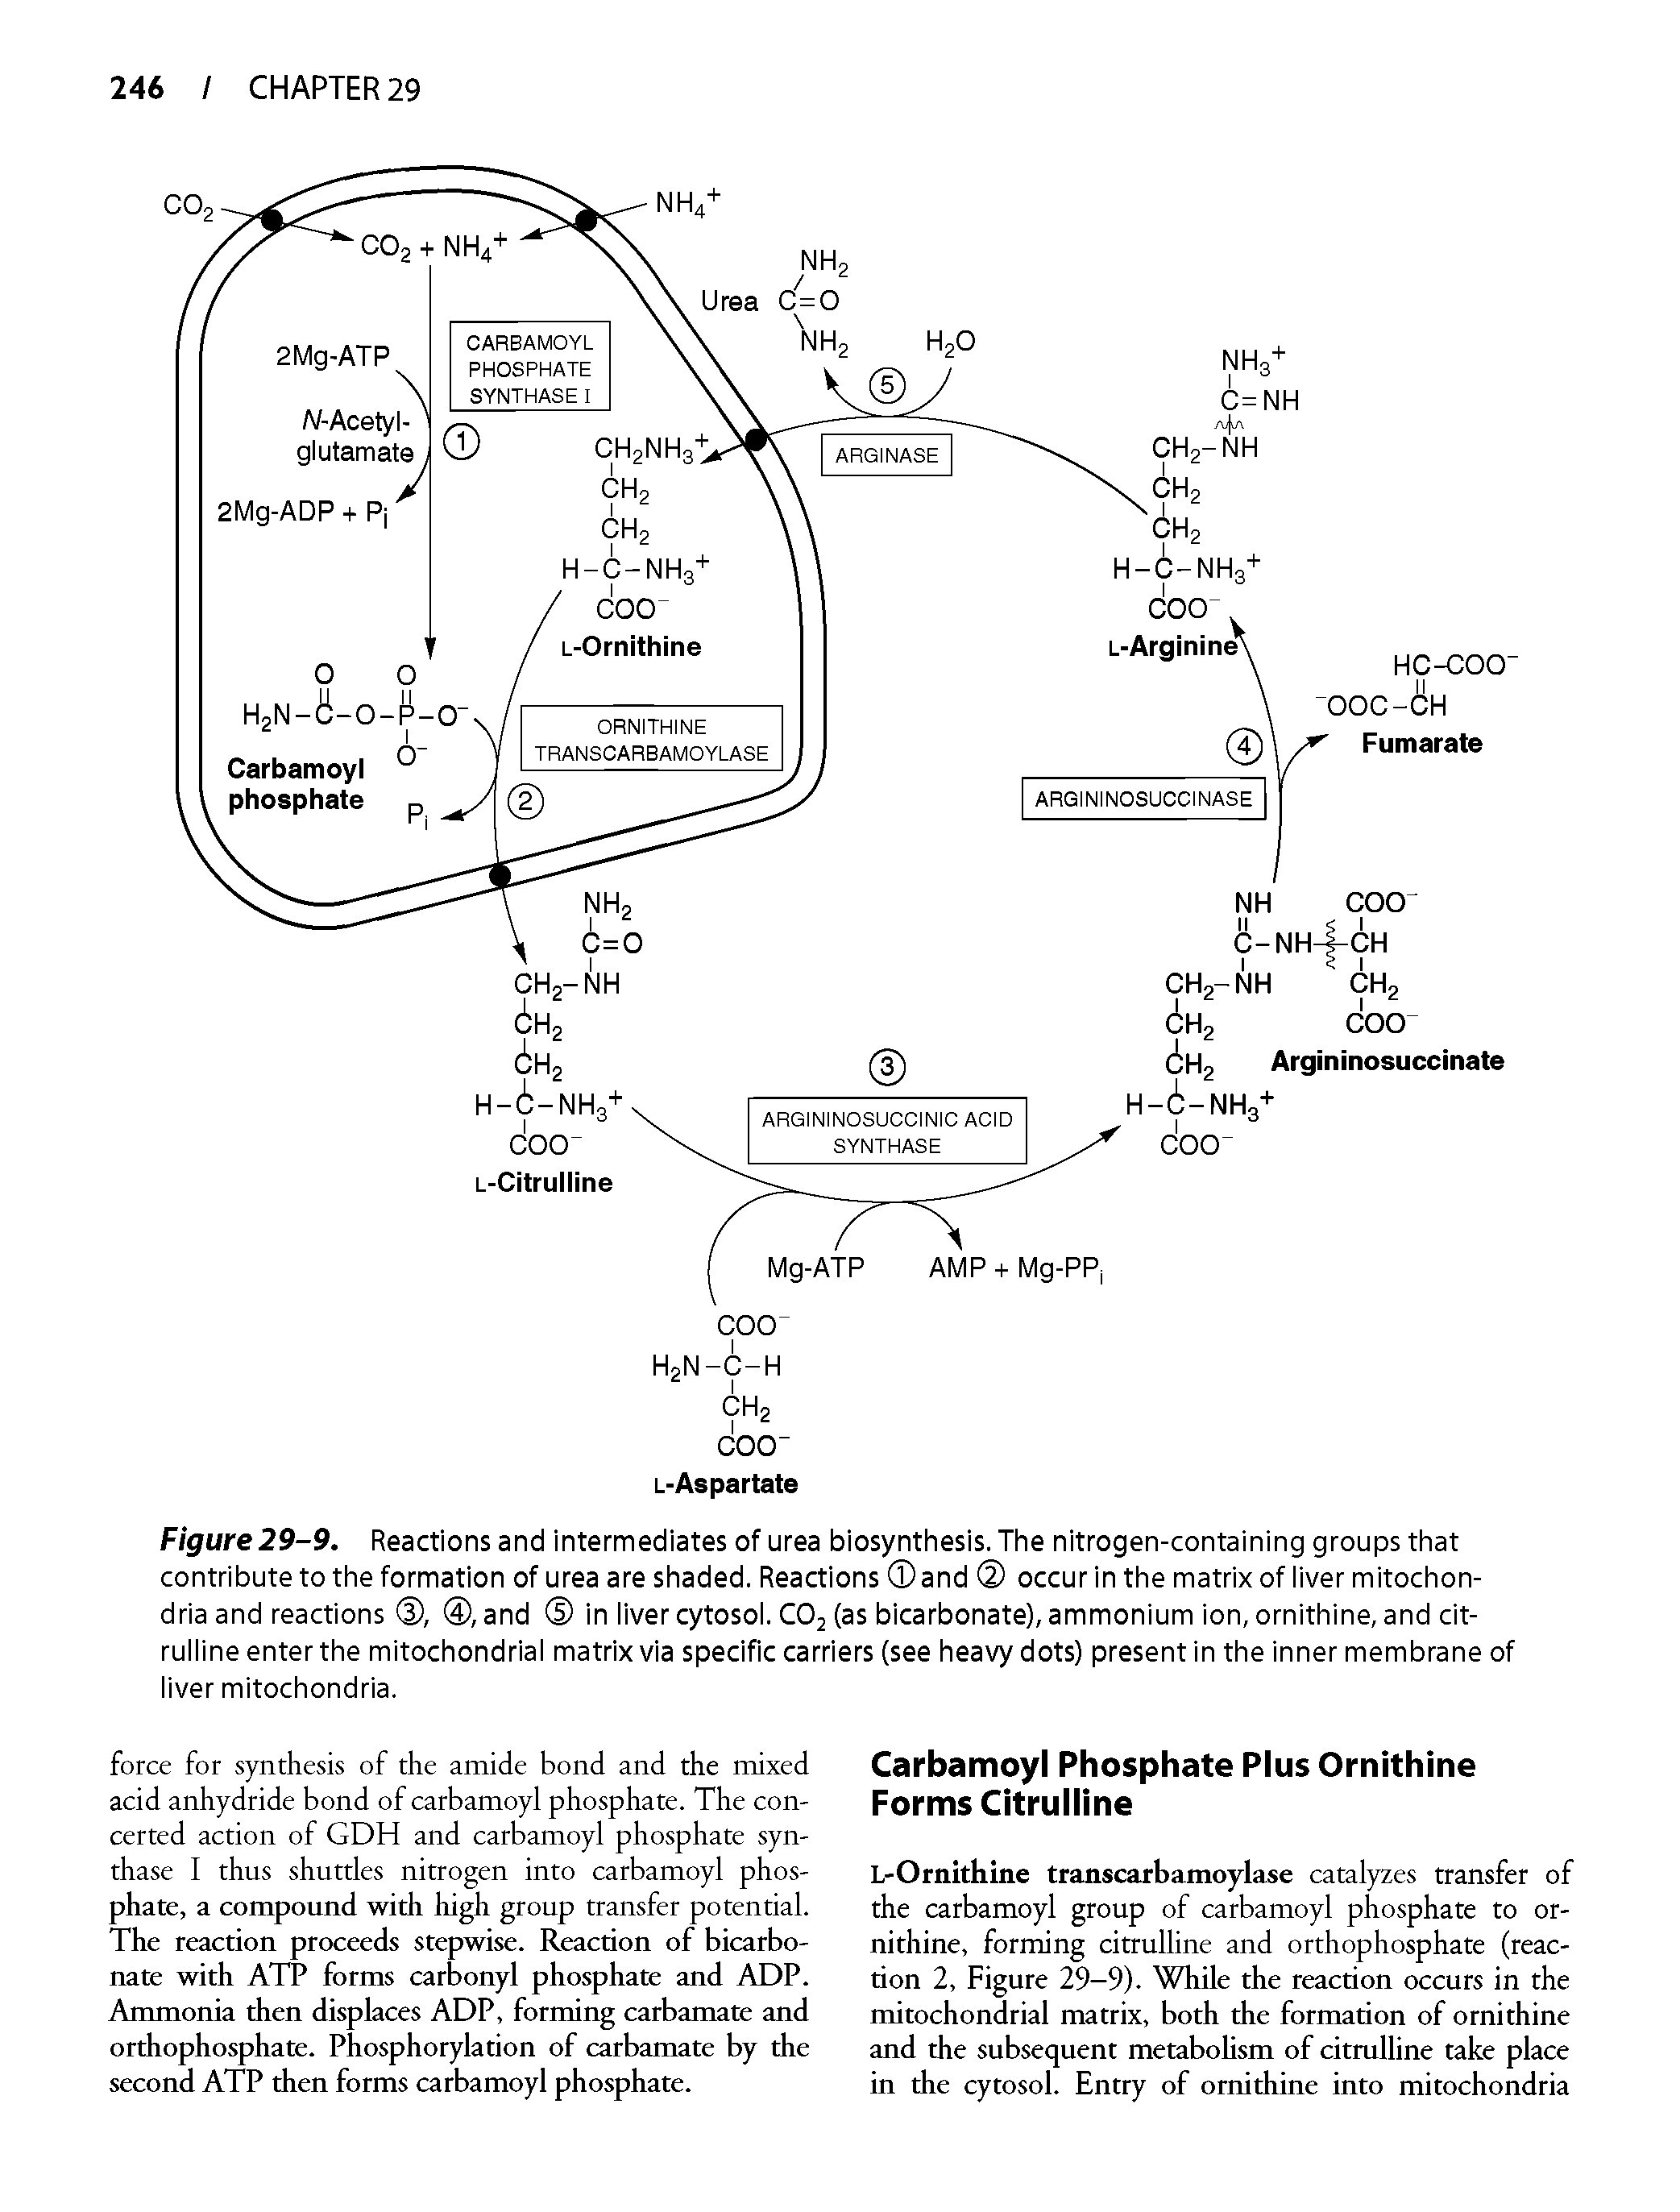 Figure 29-9. Reactions and intermediates of urea biosynthesis. The nitrogen-containing groups that contribute to the formation of urea are shaded. Reactions and occur in the matrix of iiver mitochondria and reactions , , and in iiver cytosoi. COj (as bicarbonate), ammonium ion, ornithine, and cit-ruiiine enter the mitochondriai matrix via specific carriers (see heavy dots) present in the inner membrane of iiver mitochondria.